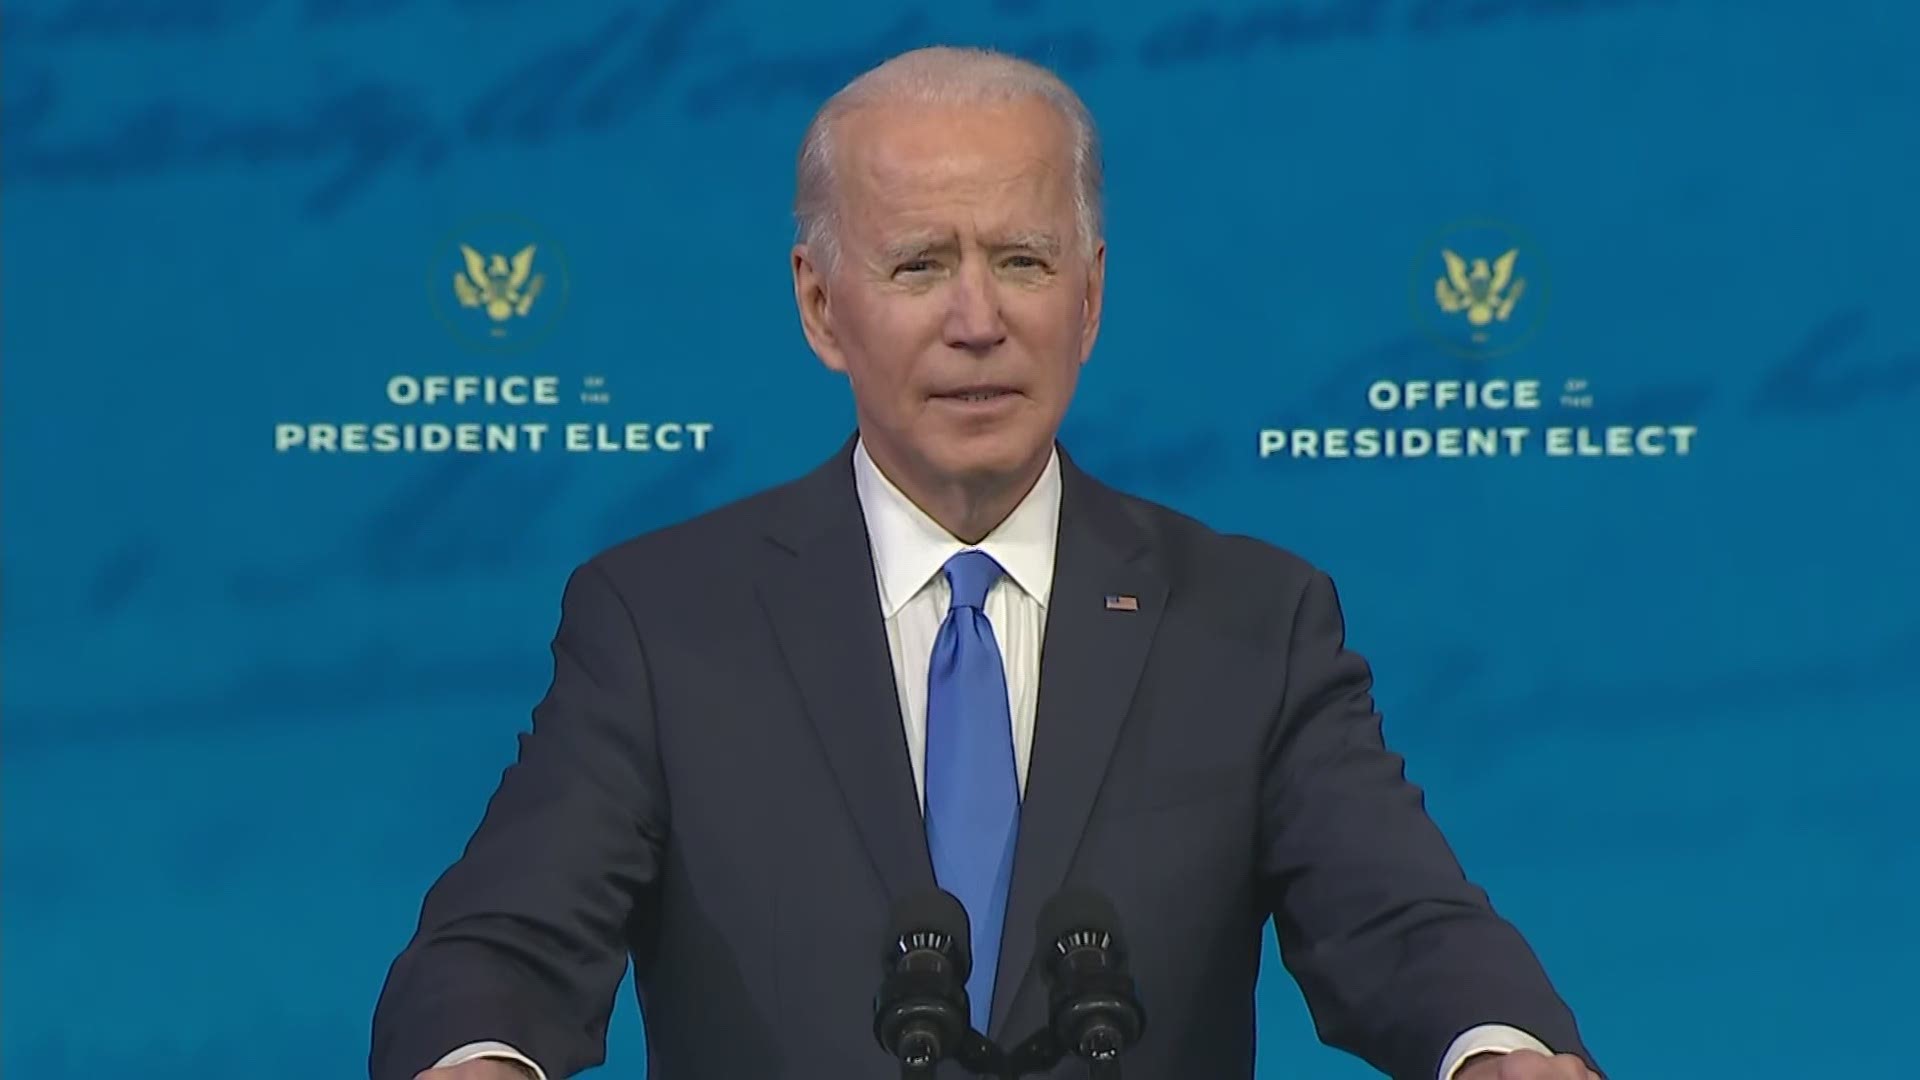 President-elect Joe Biden thanked elections workers who endured threats and intimidation during the contested 2020 presidential election.